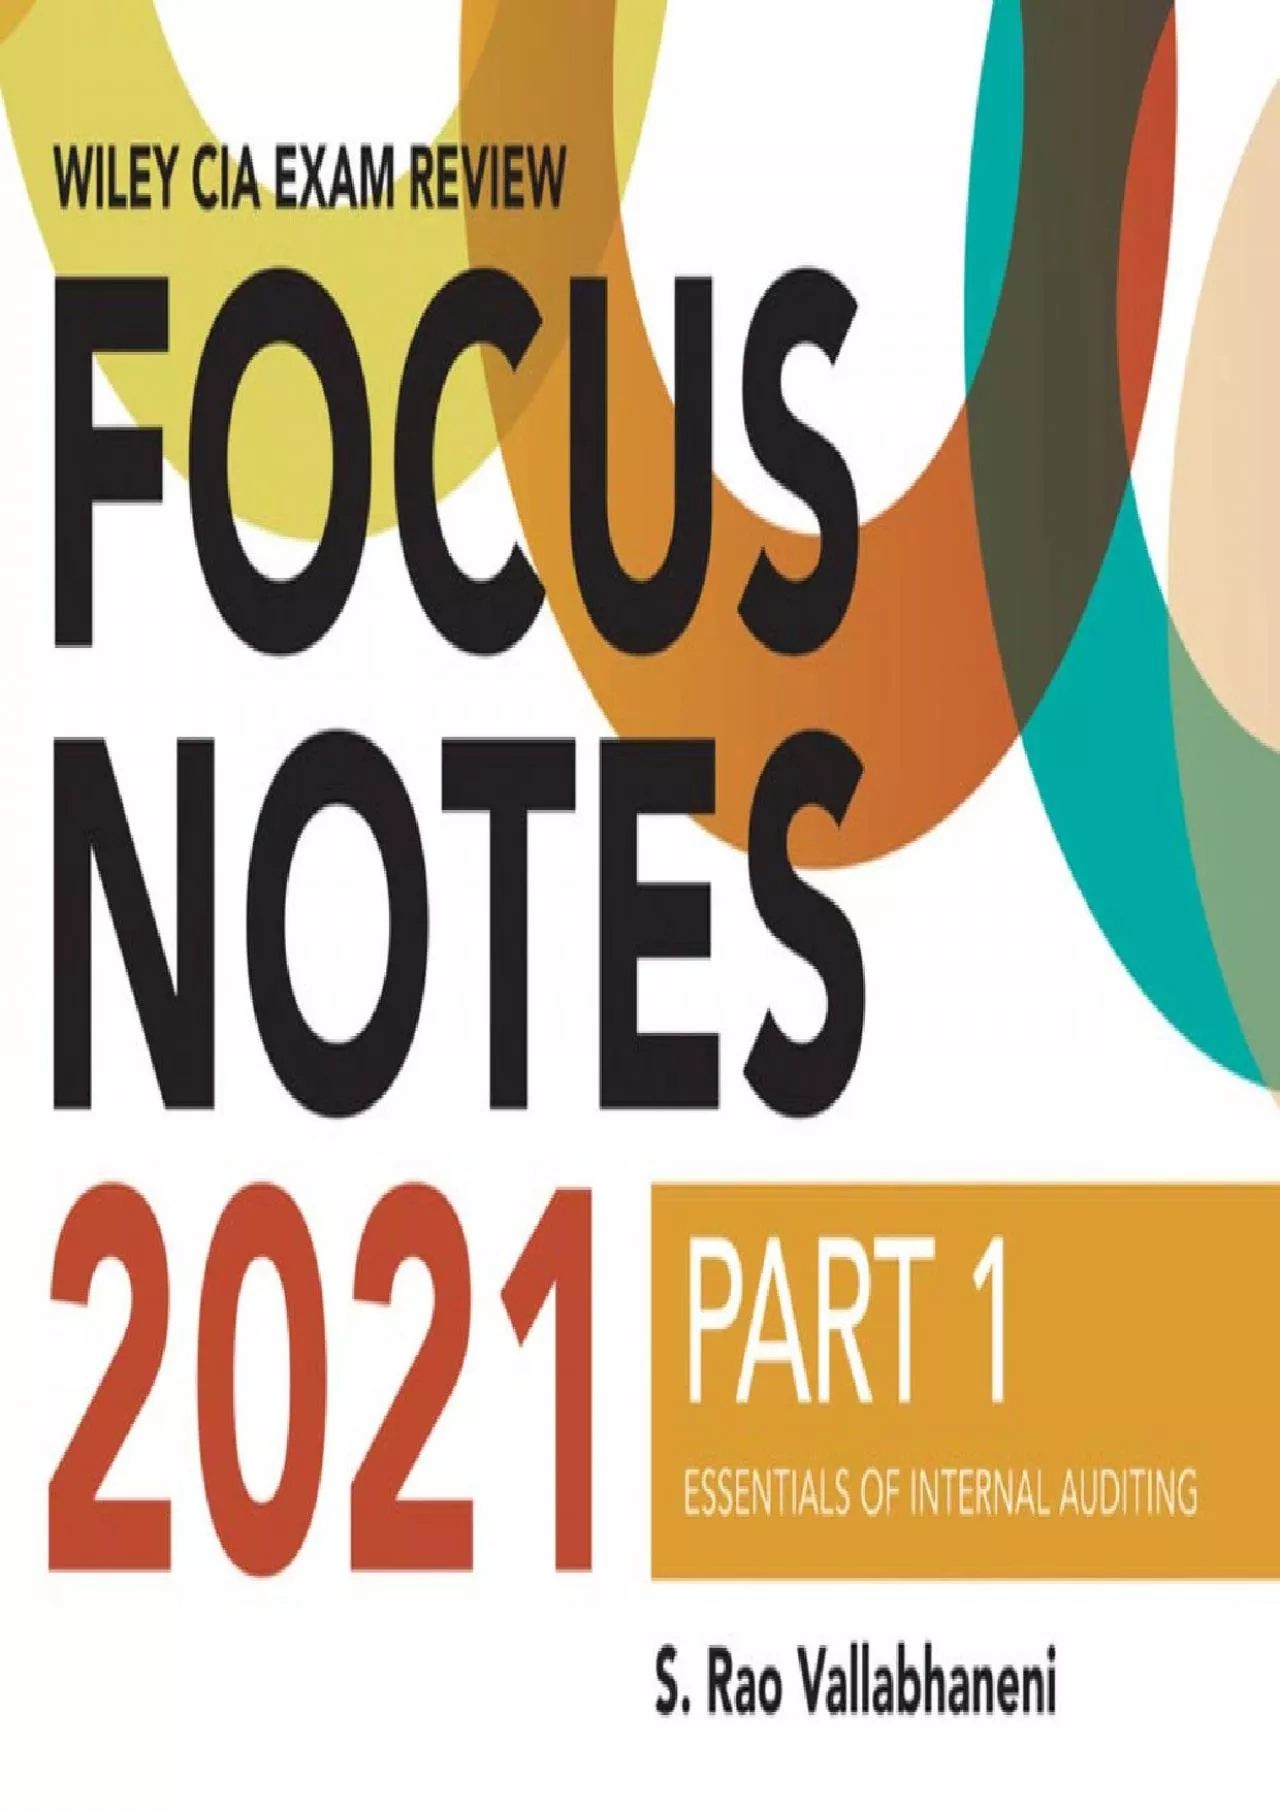 (EBOOK)-Wiley CIA Exam Review 2021 Focus Notes, Part 1: Essentials of Internal Auditing